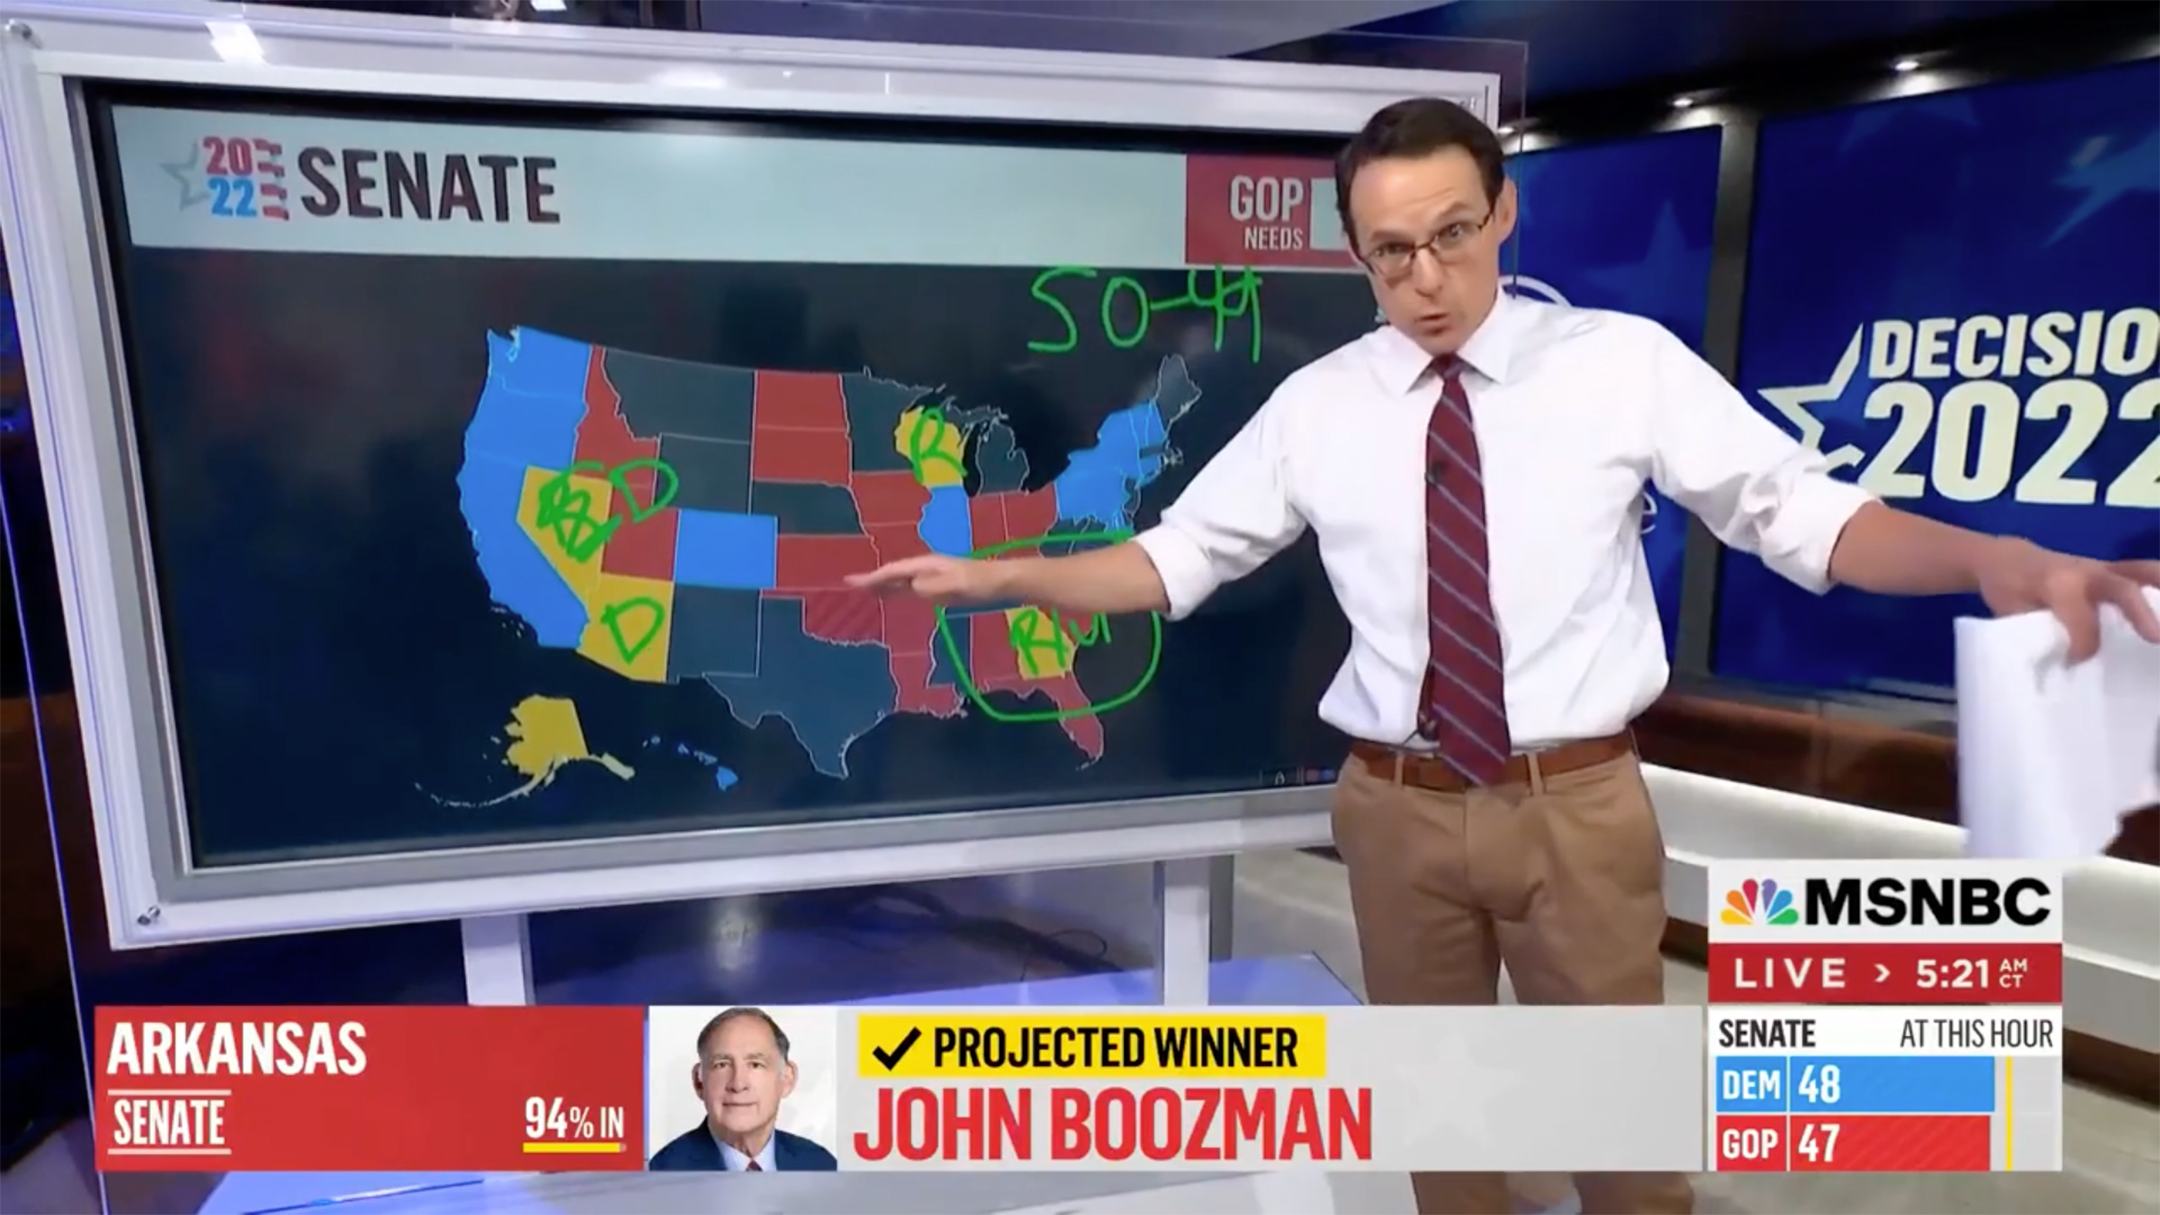 Screenshot of a video of a man in a white shirt and tie gesturing in front of a video screen displaying a map of the United States with the states represented in different colors